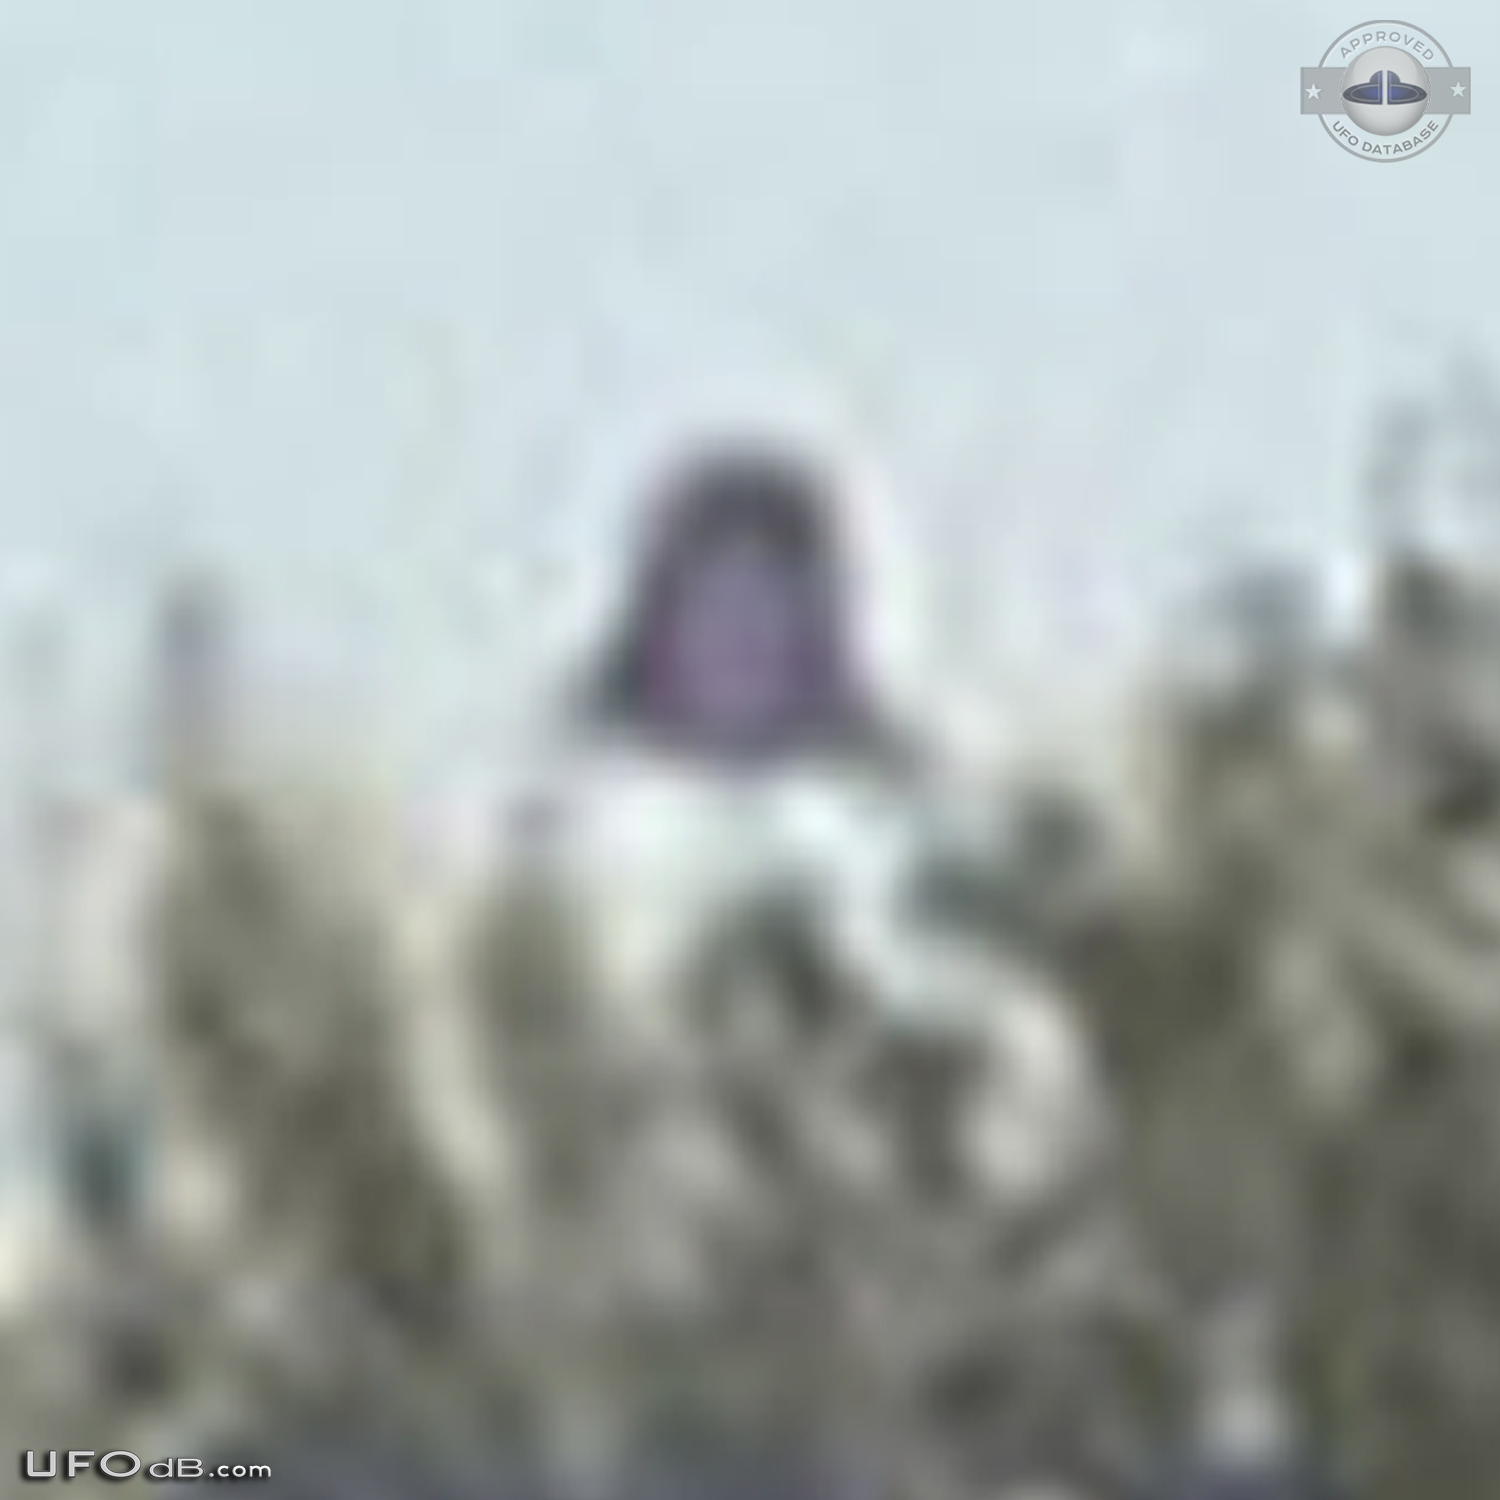 Massive Bell Shaped UFO over Sawtooth National Forest in Idaho 2014 UFO Picture #566-7